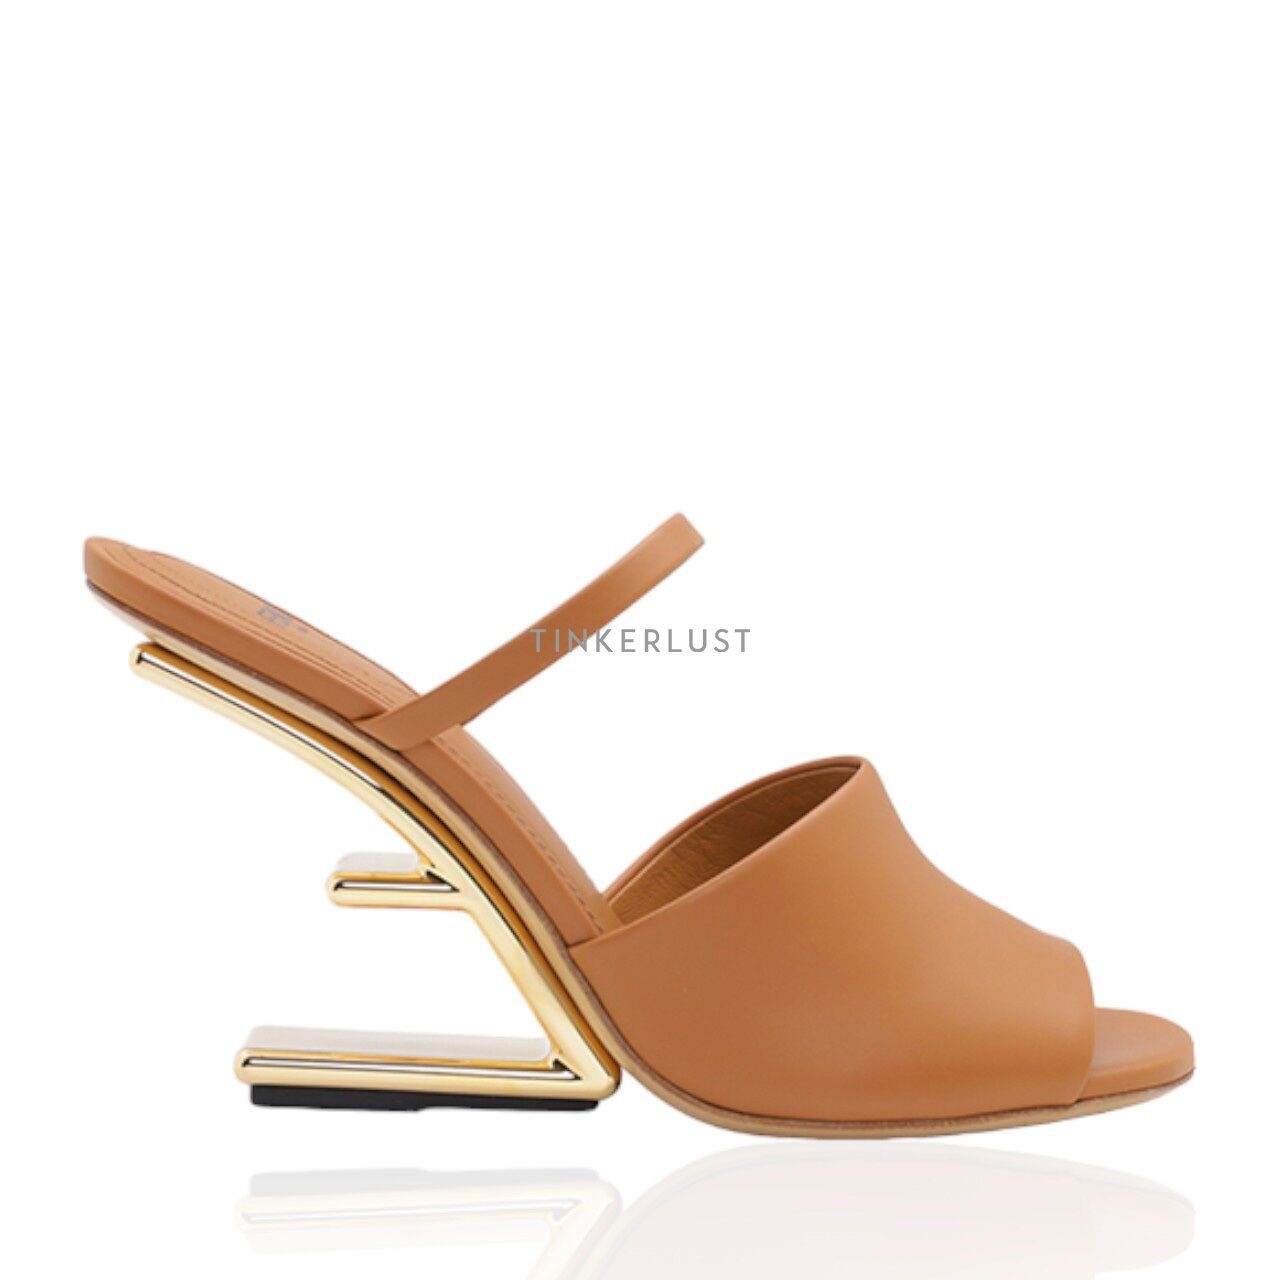 Fendi Women First Open Toe Sandals 105mm in Caramel Leather with Diagonal F-Shaped Heels